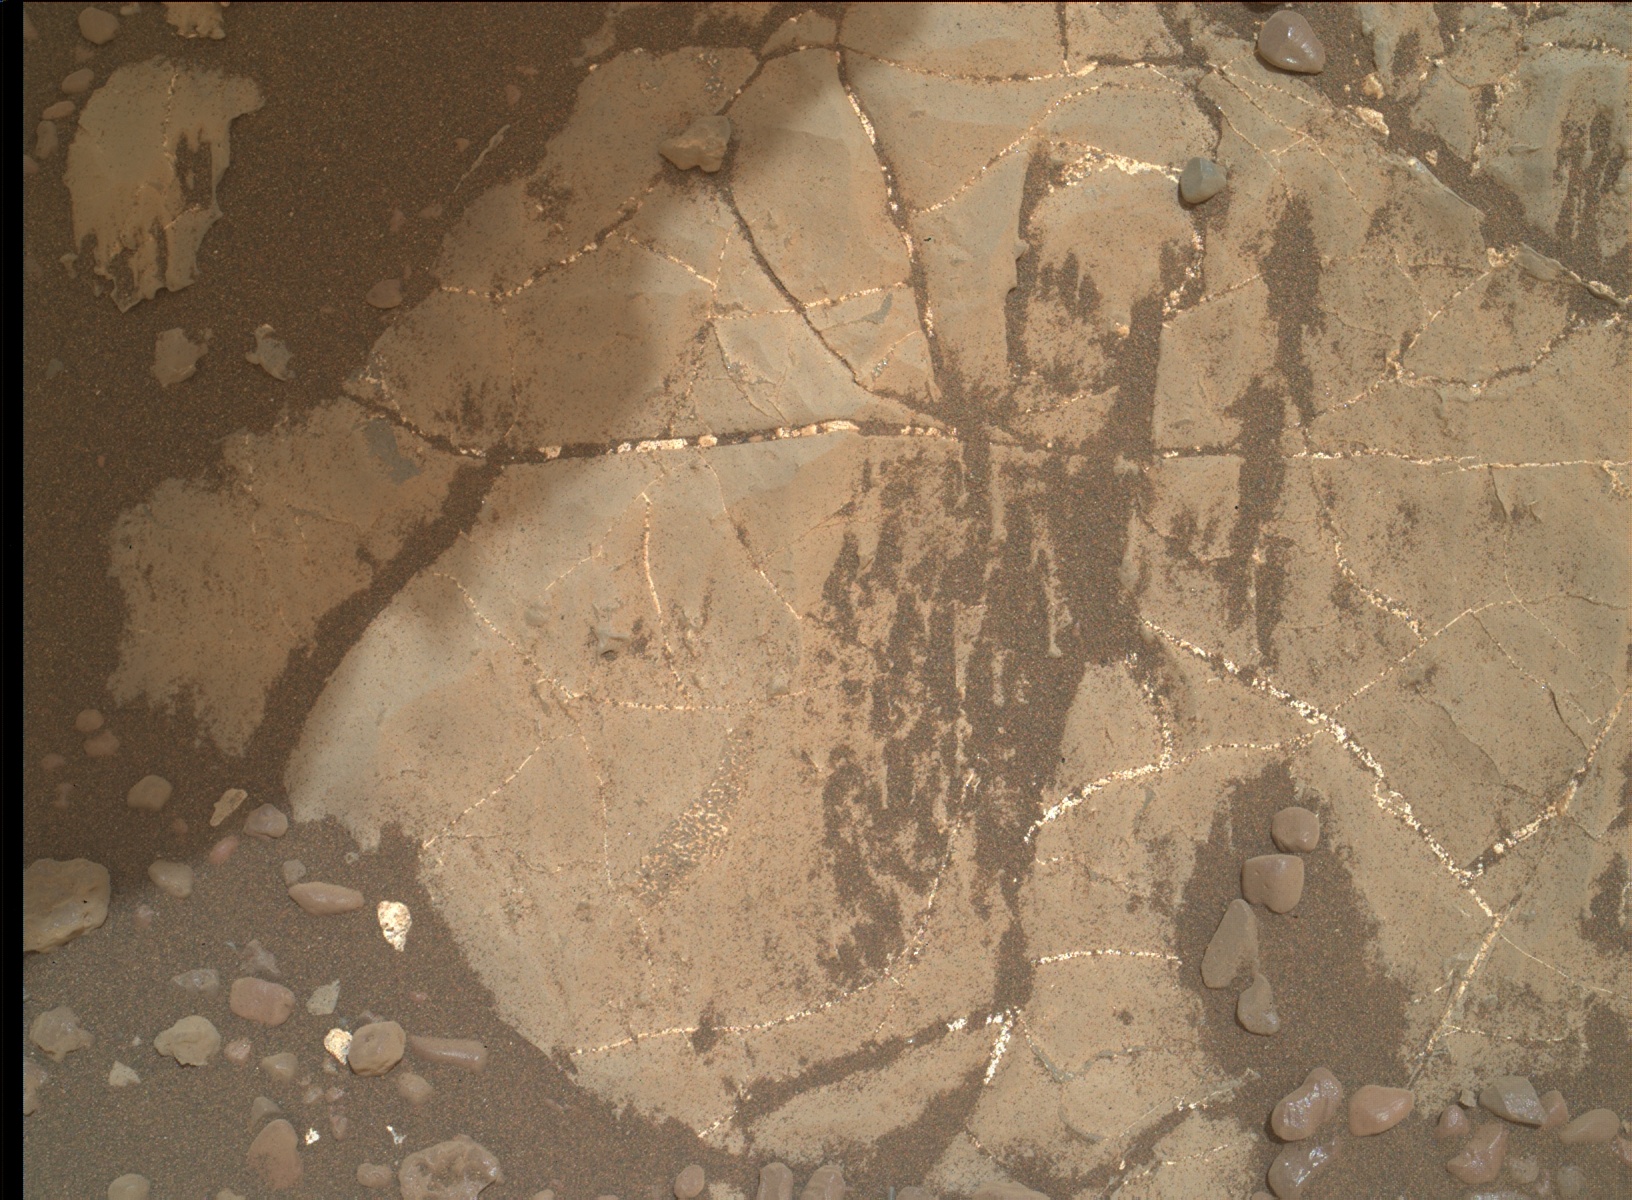 Nasa's Mars rover Curiosity acquired this image using its Mars Hand Lens Imager (MAHLI) on Sol 2170